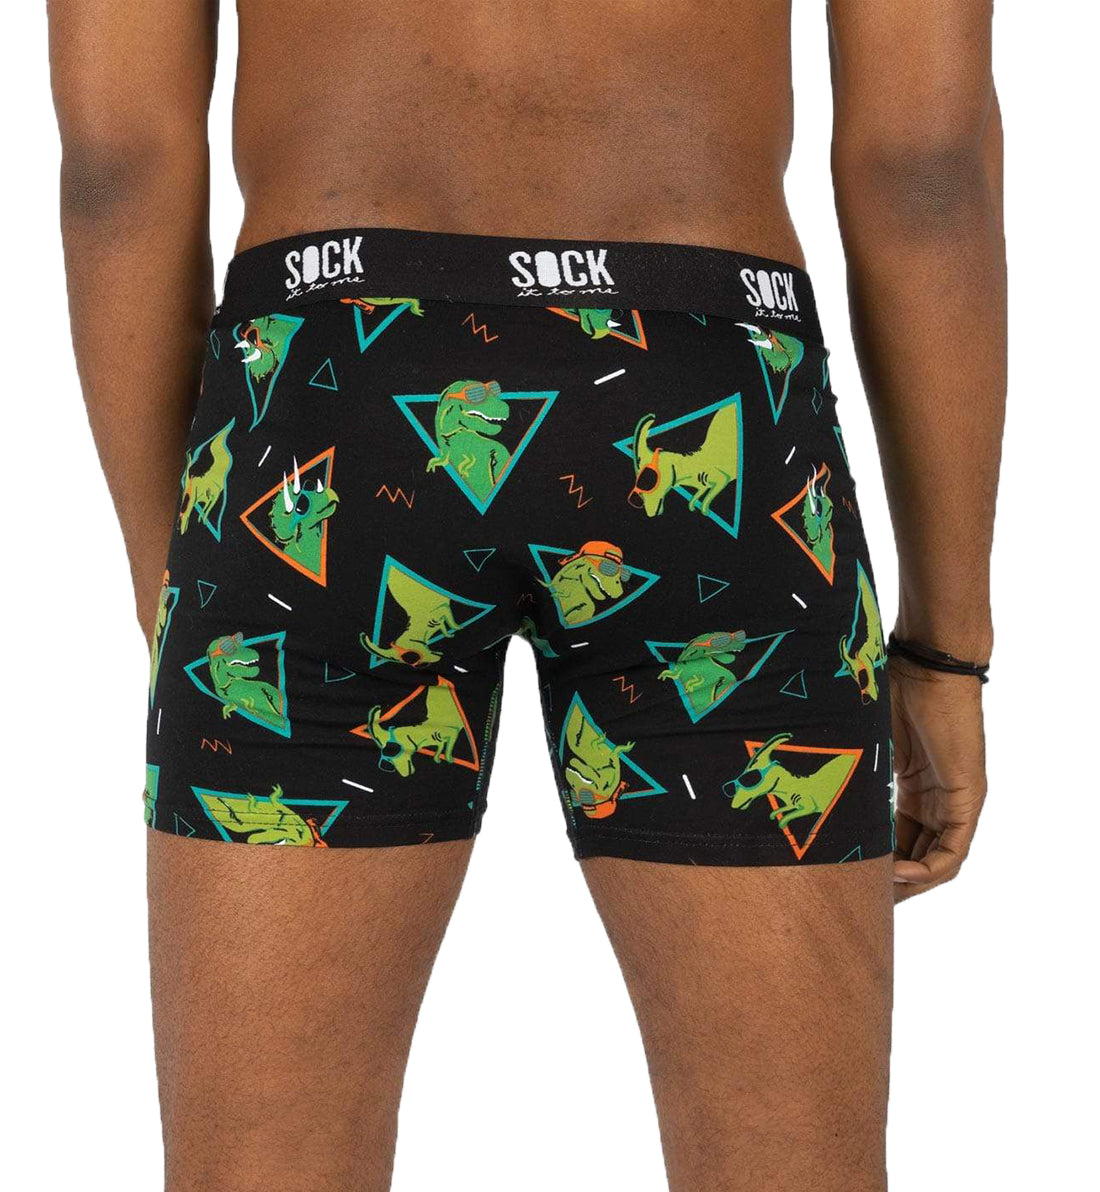 SOCK it to me Men's Boxer Brief (umb064),Small,Jurassic Party - Jurassic Party,Small